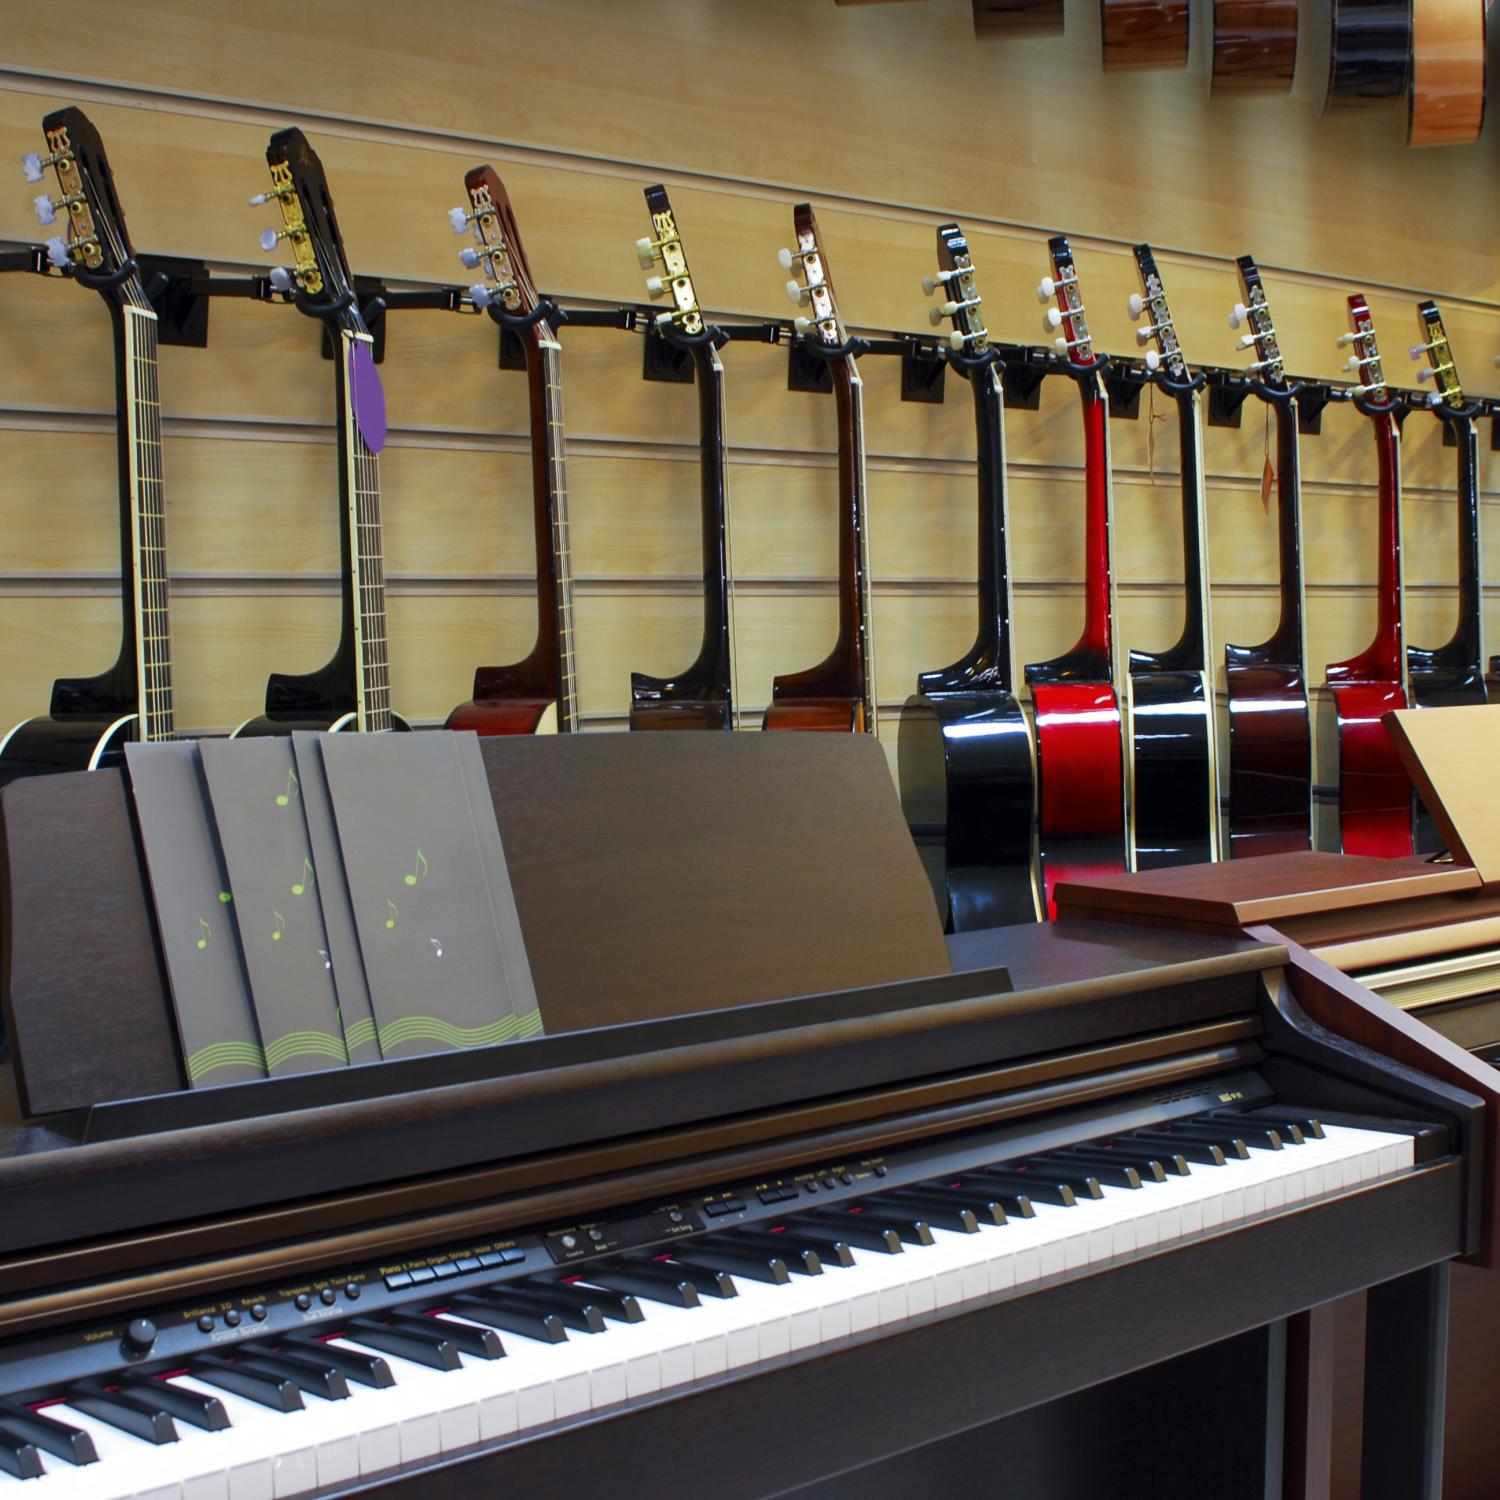 Instruments in a music shop